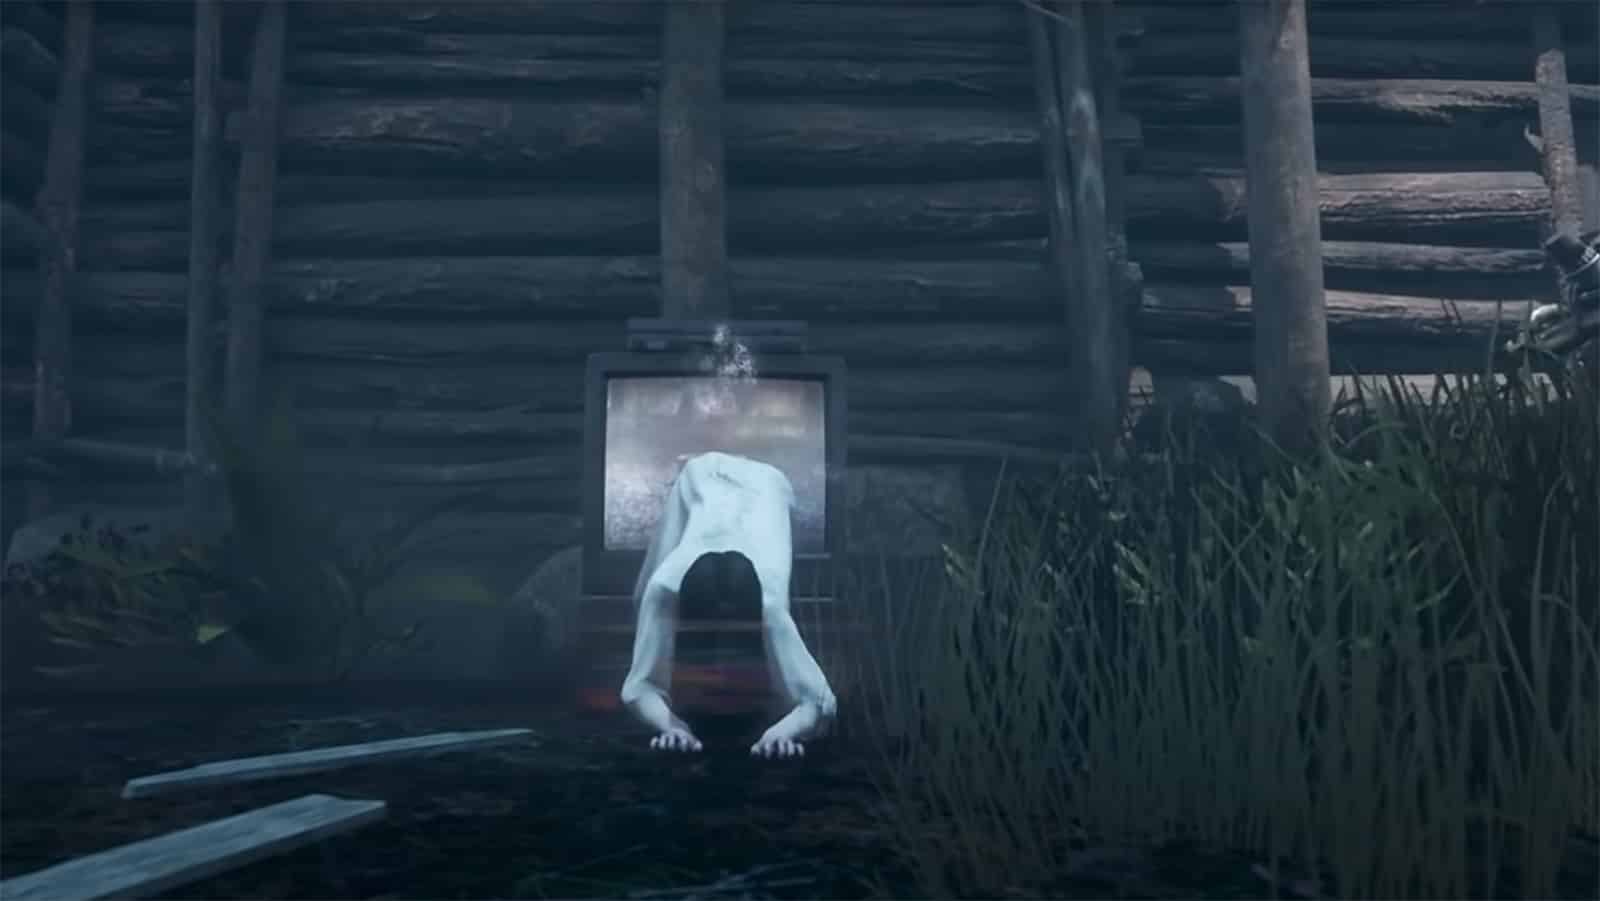 Sadako crawling out of a TV in Dead by Daylight